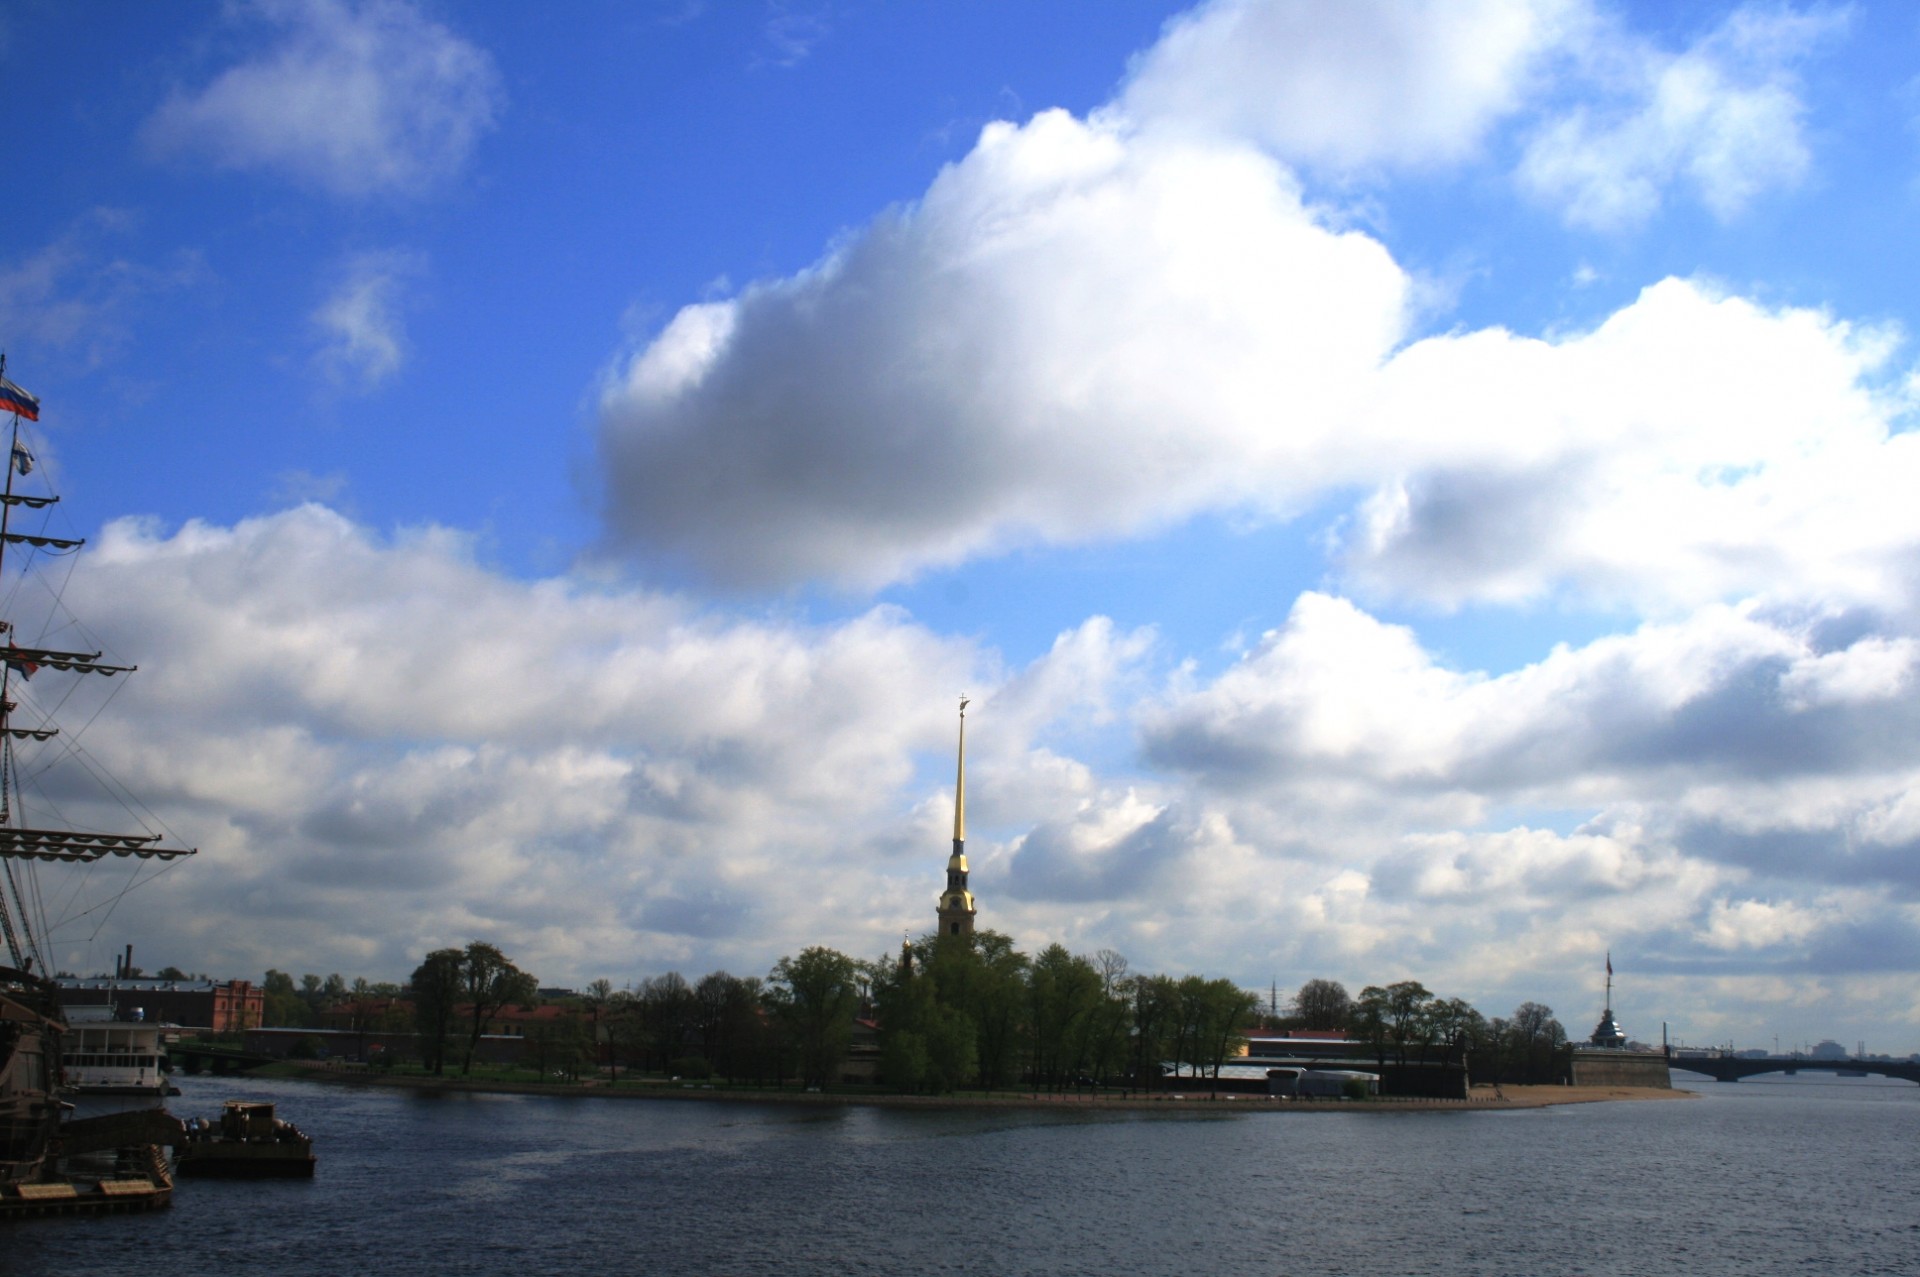 peter and paul fortress, neva river, hare island, st petersburg